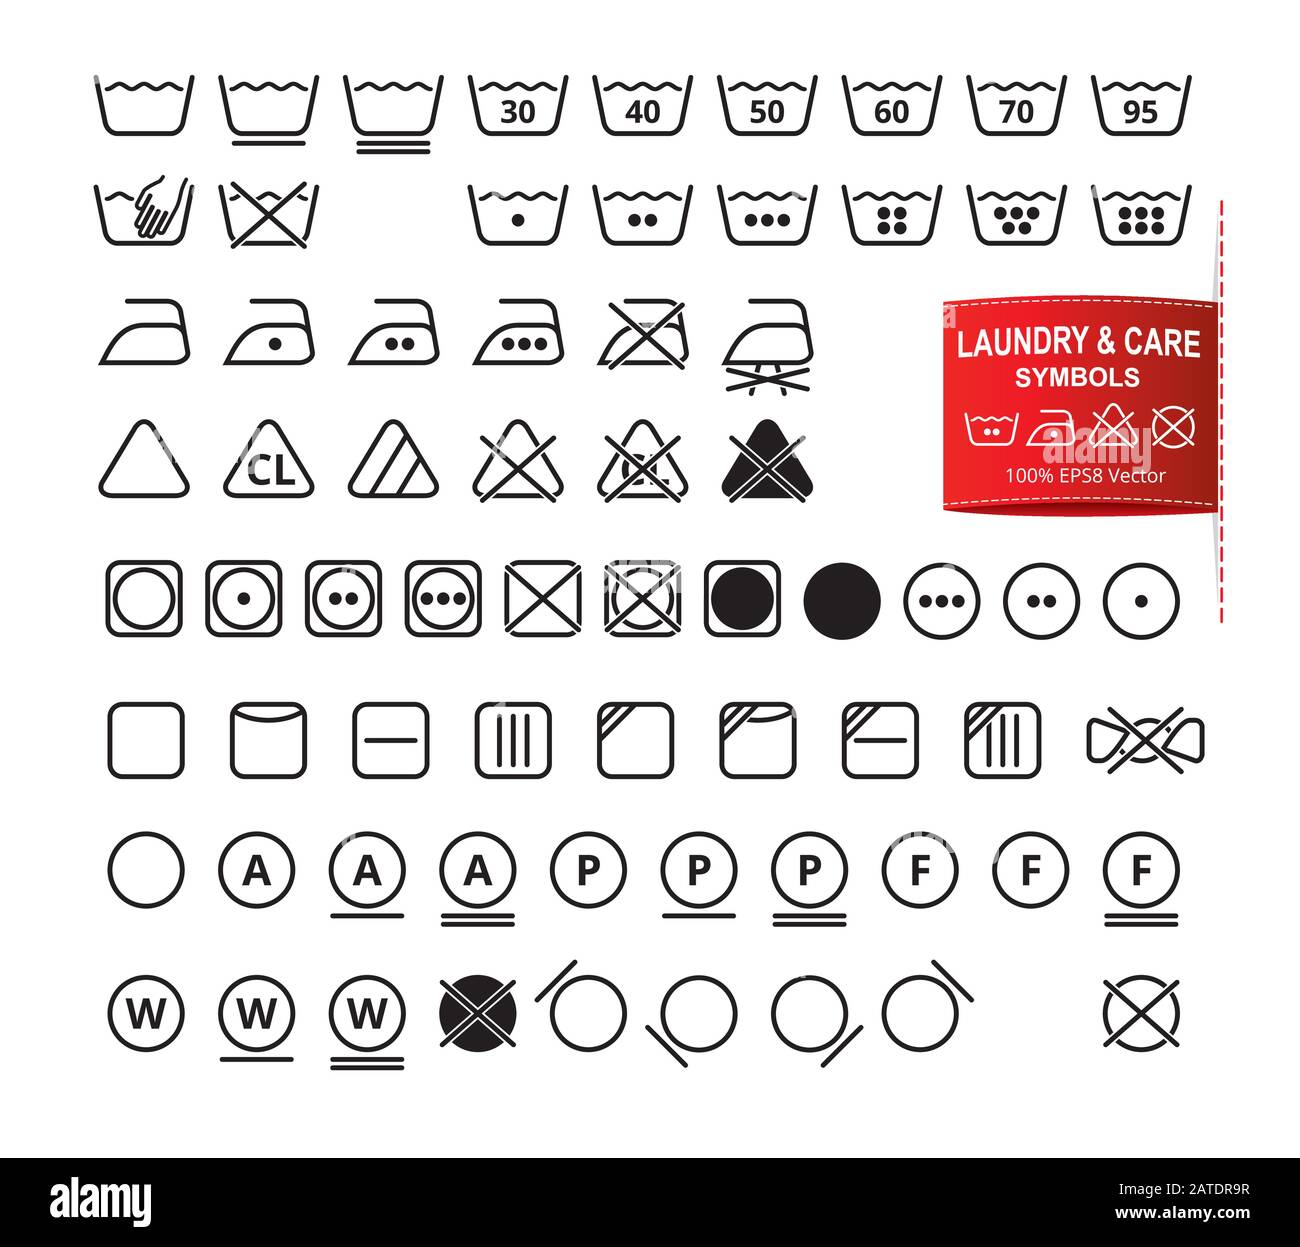 Icon set of laundry symbols in modern thin line flat design style. Clothing washing, bleaching, drying, ironing, cleaning pictograms. Garment care lab Stock Vector